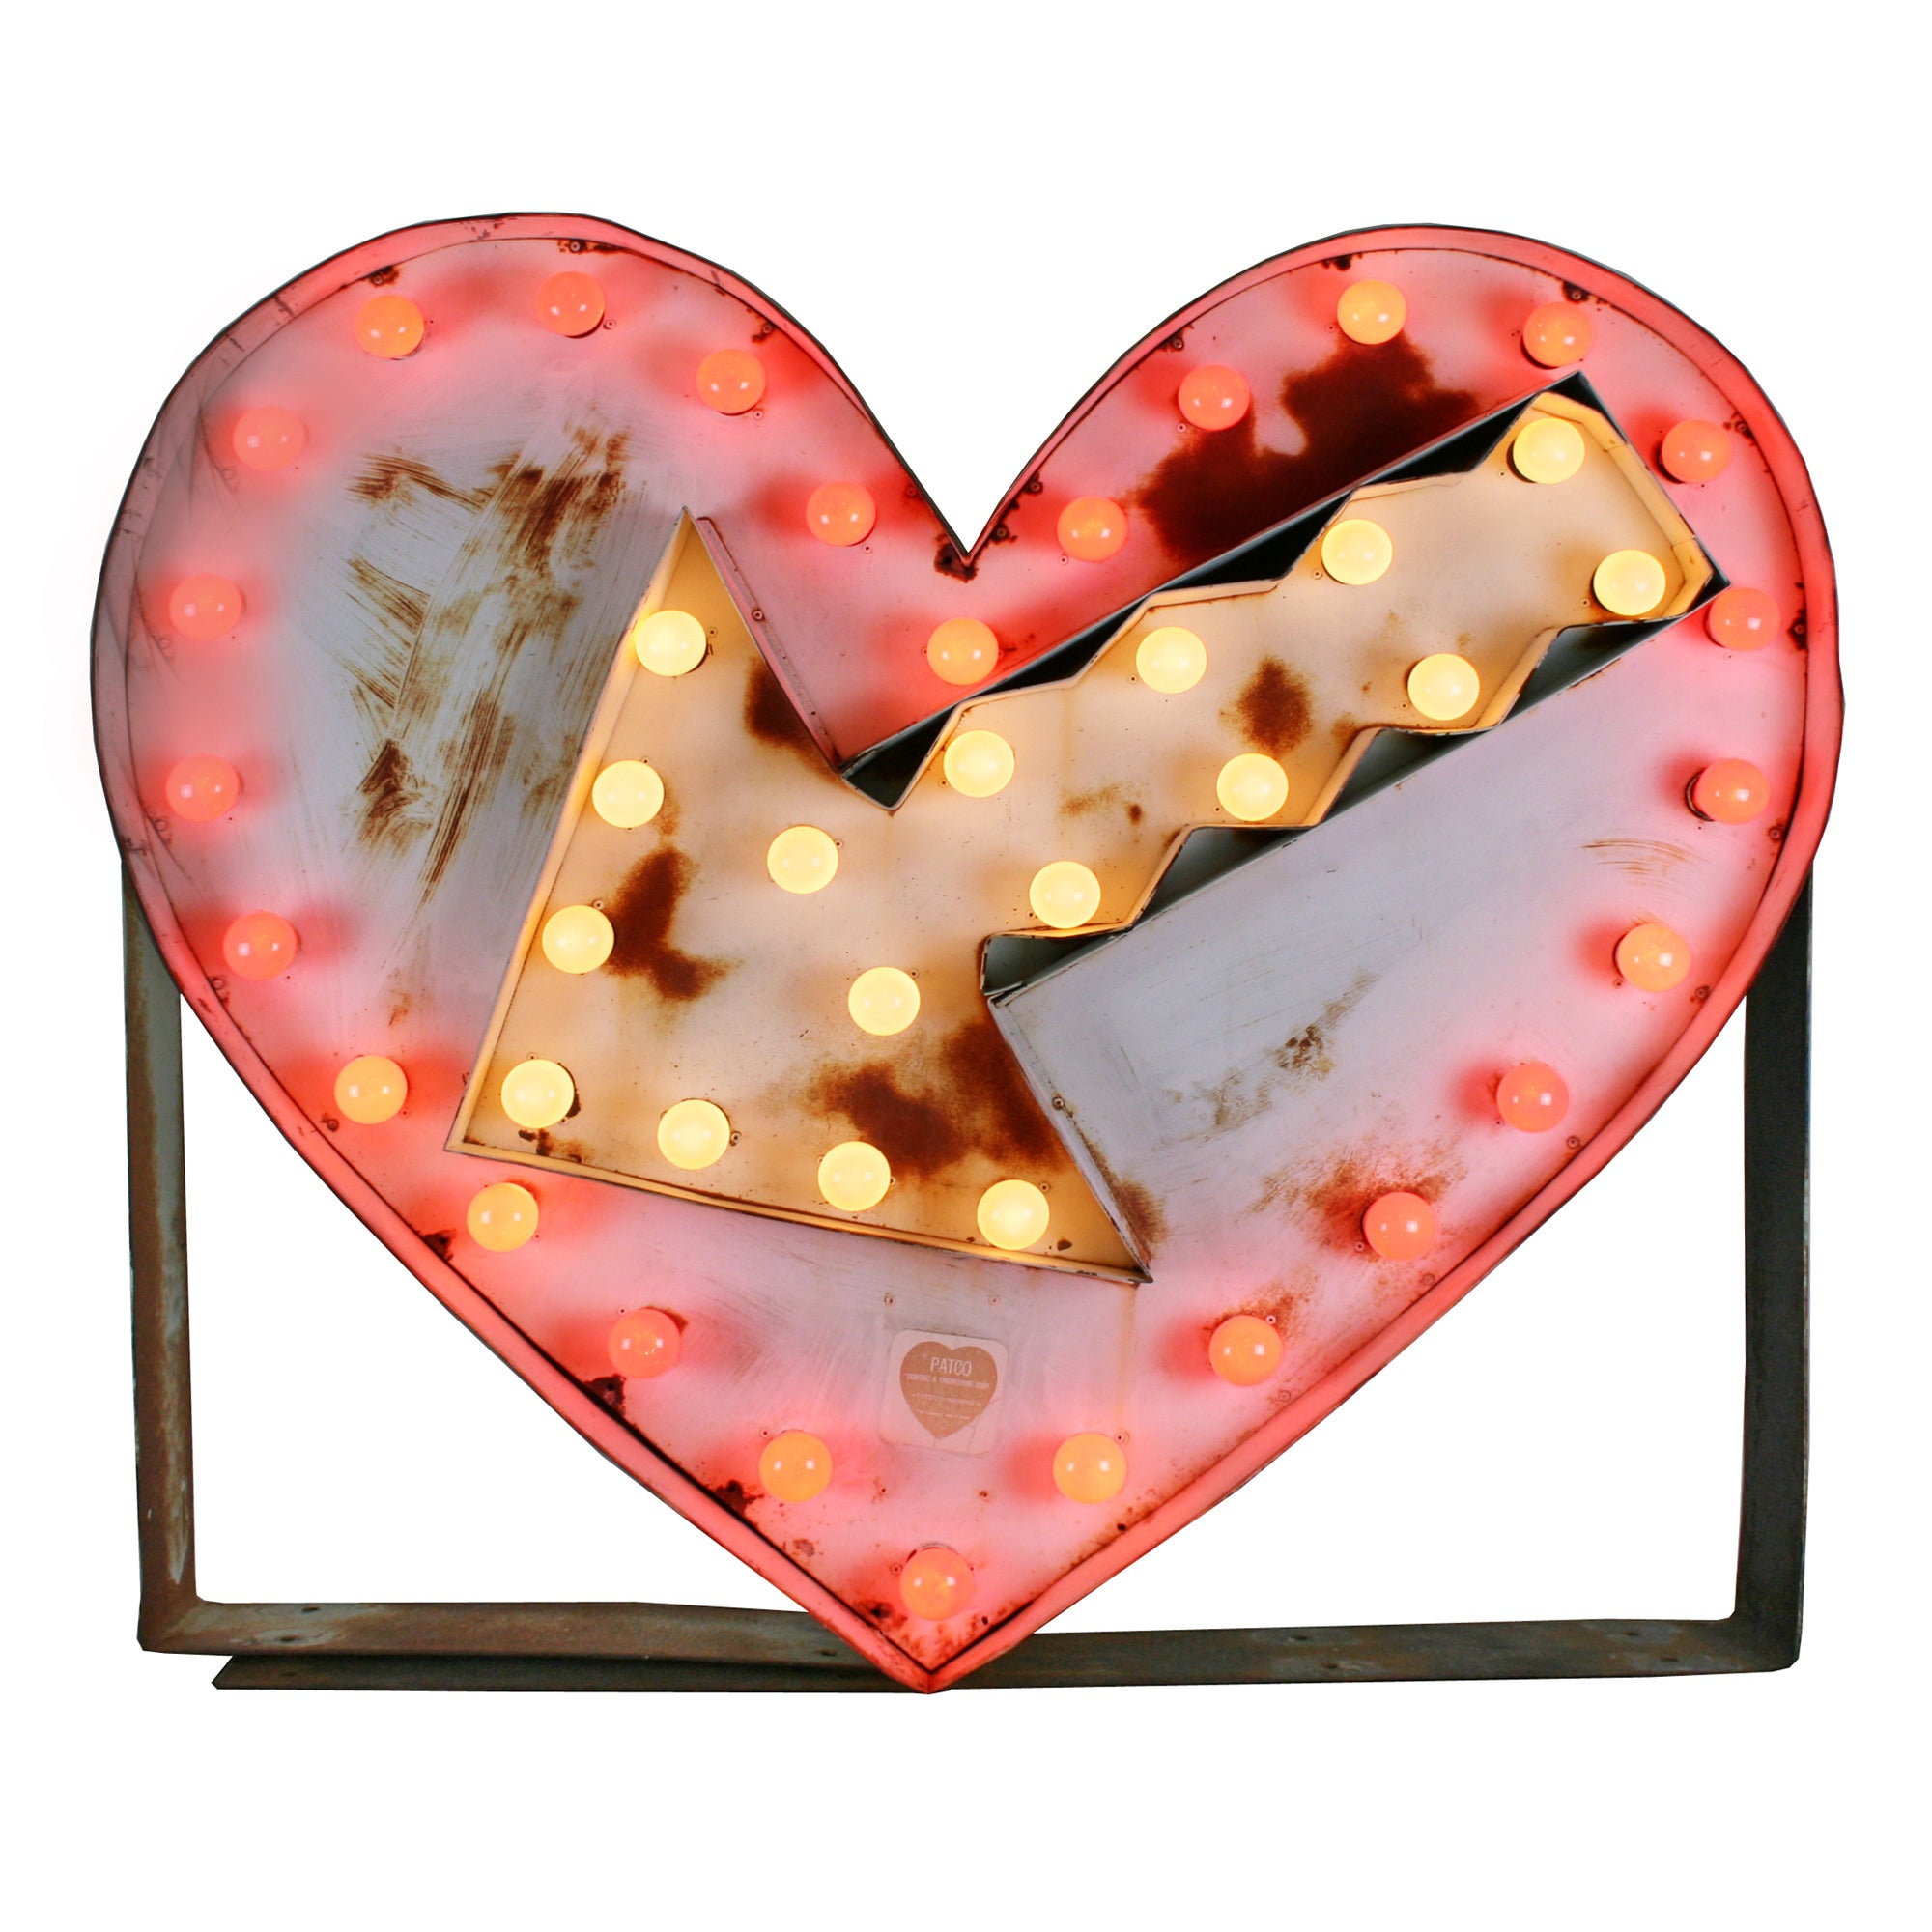 Giant Flashing Heart Carnival Marquee Sign, circa 1960